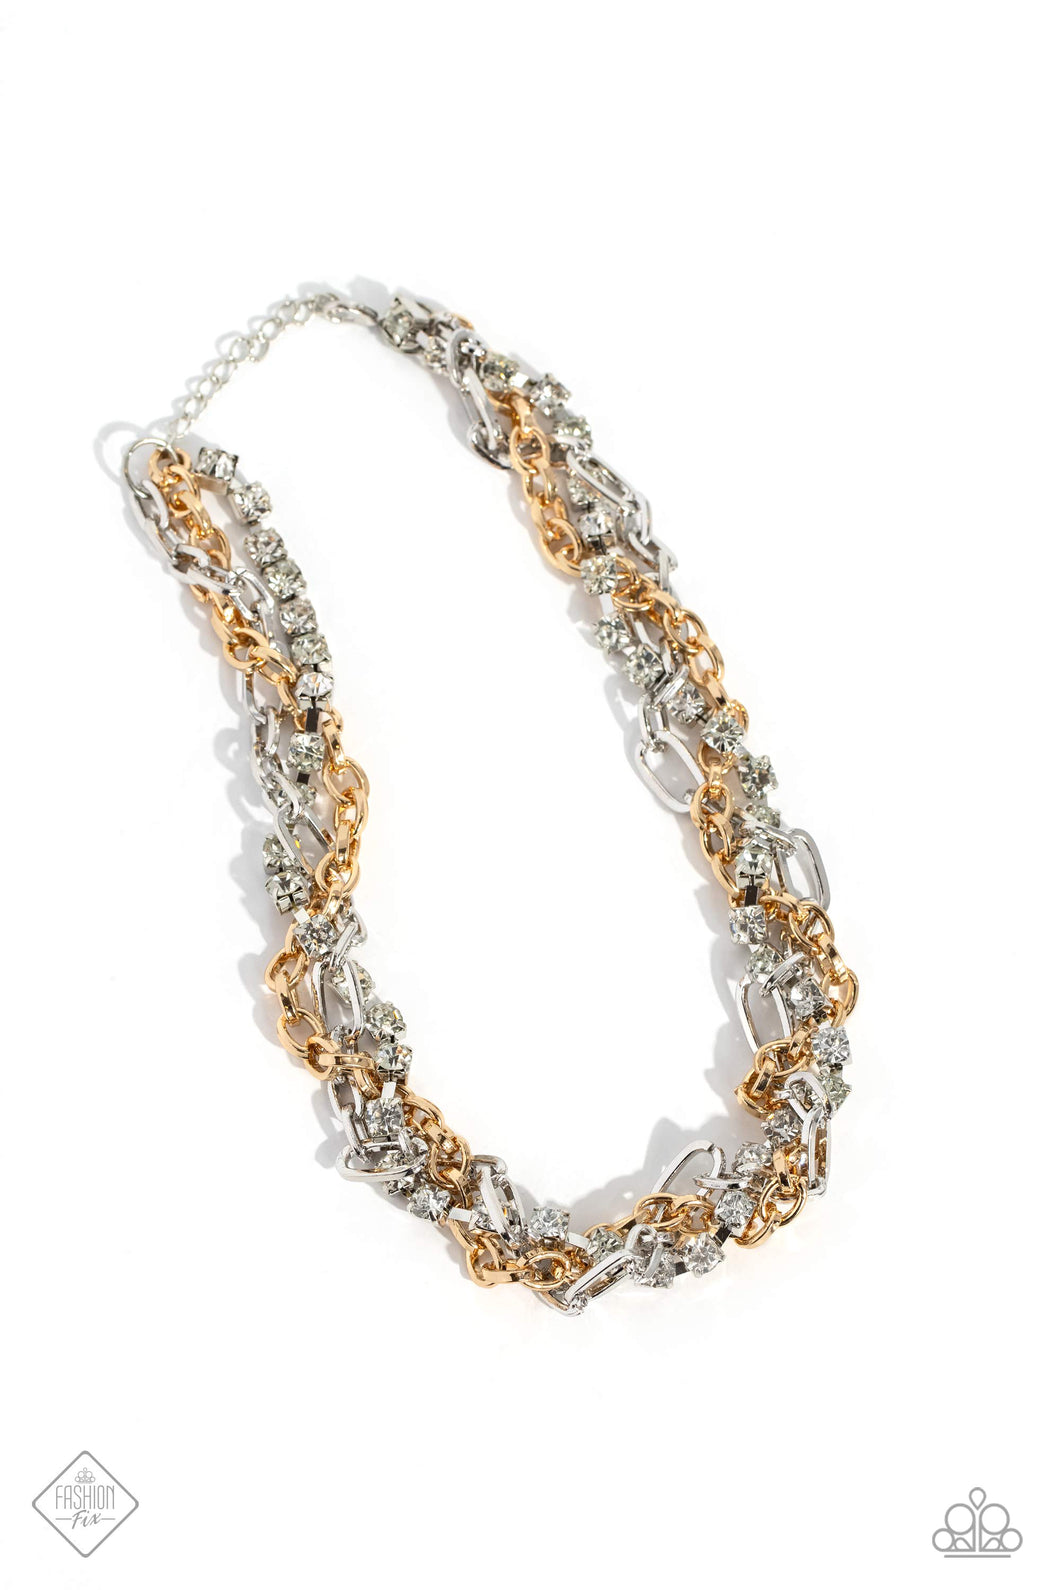 Totally Two-Toned - Multicolor Gold & Silver Necklace